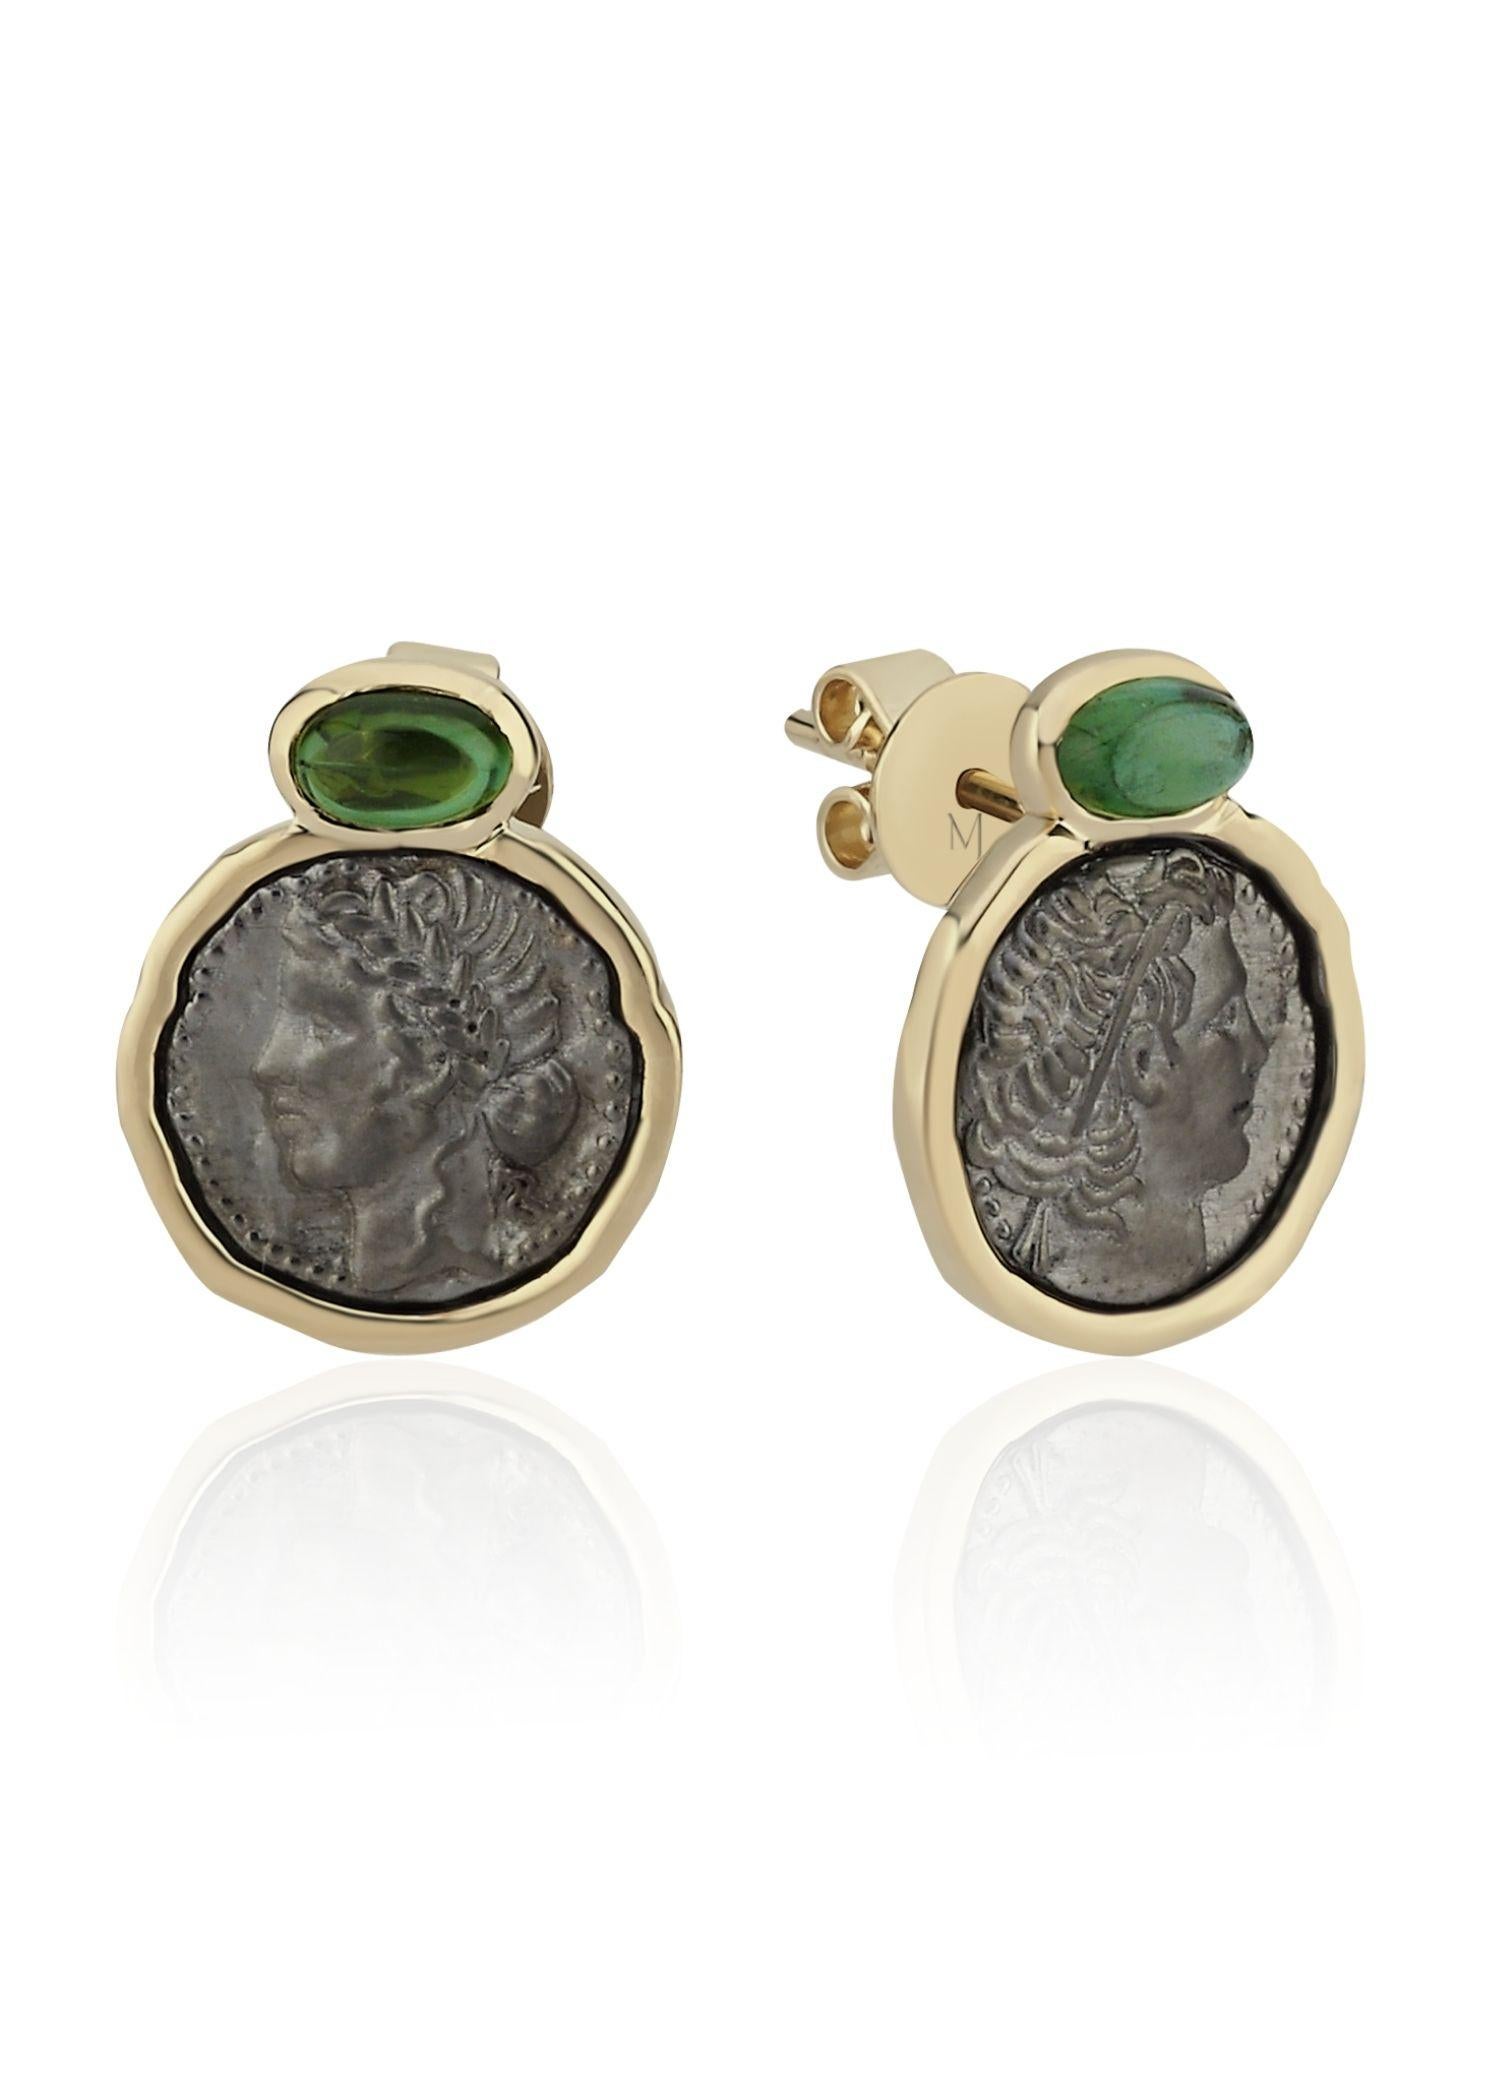 Melie Jewelry Cleopatra & Marcus Earrings

14K Yellow Gold, 0.70 ct Green Tourmaline, 1.30 g Oxidized 925 Sterling Silver

The Story Behind
Inspired by one of William Shakespeare's most famous tragedies, 